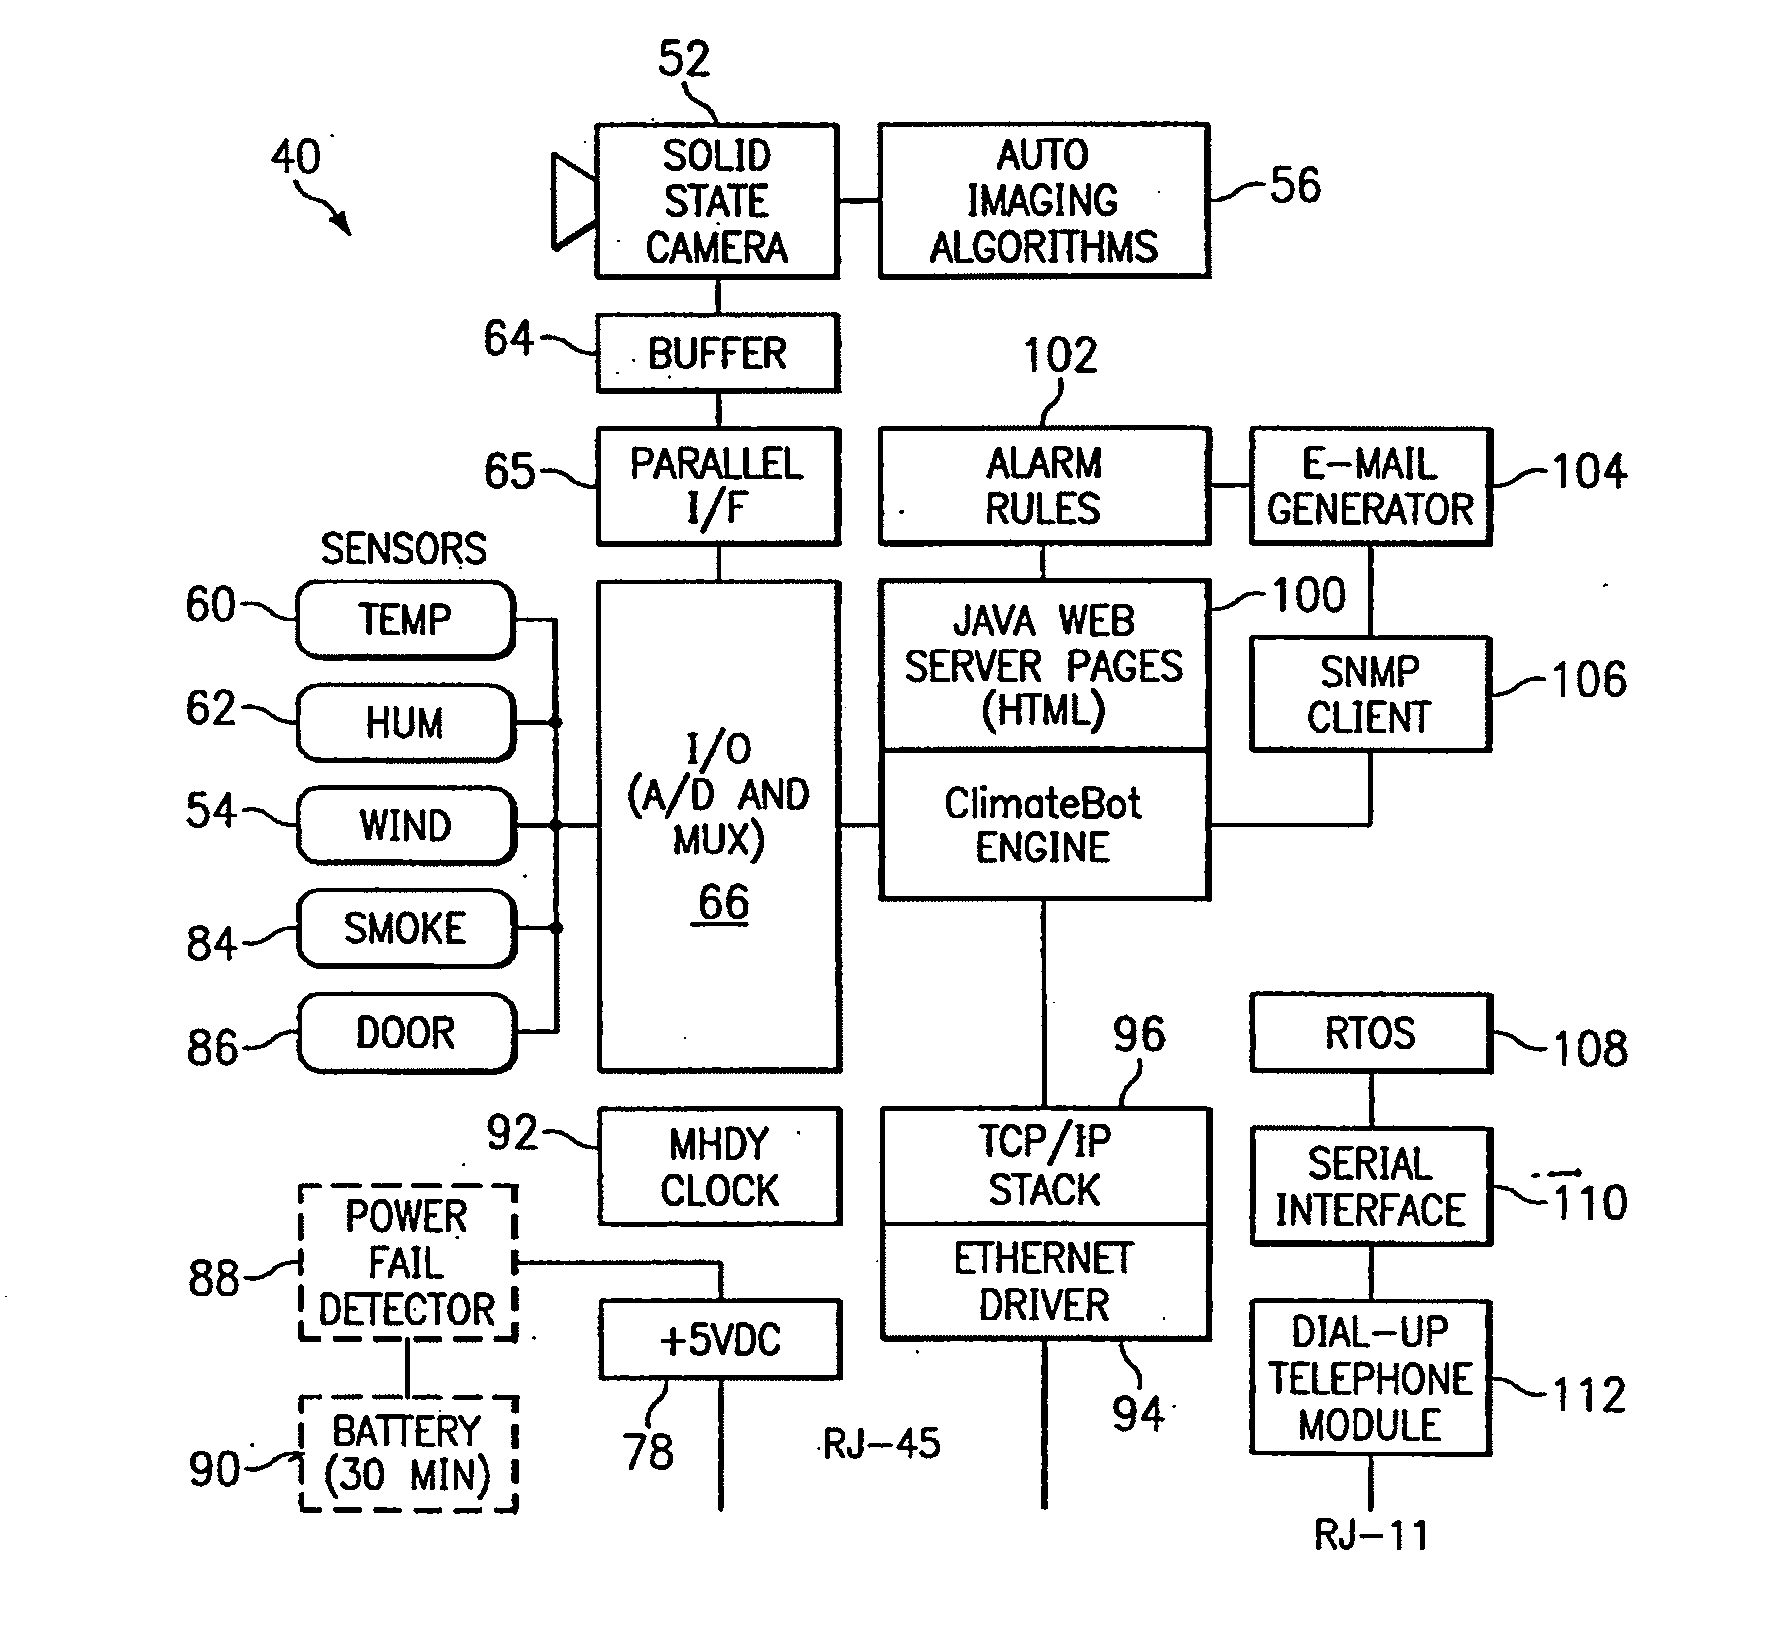 Method and System for Monitoring Computer Networks and Equipment